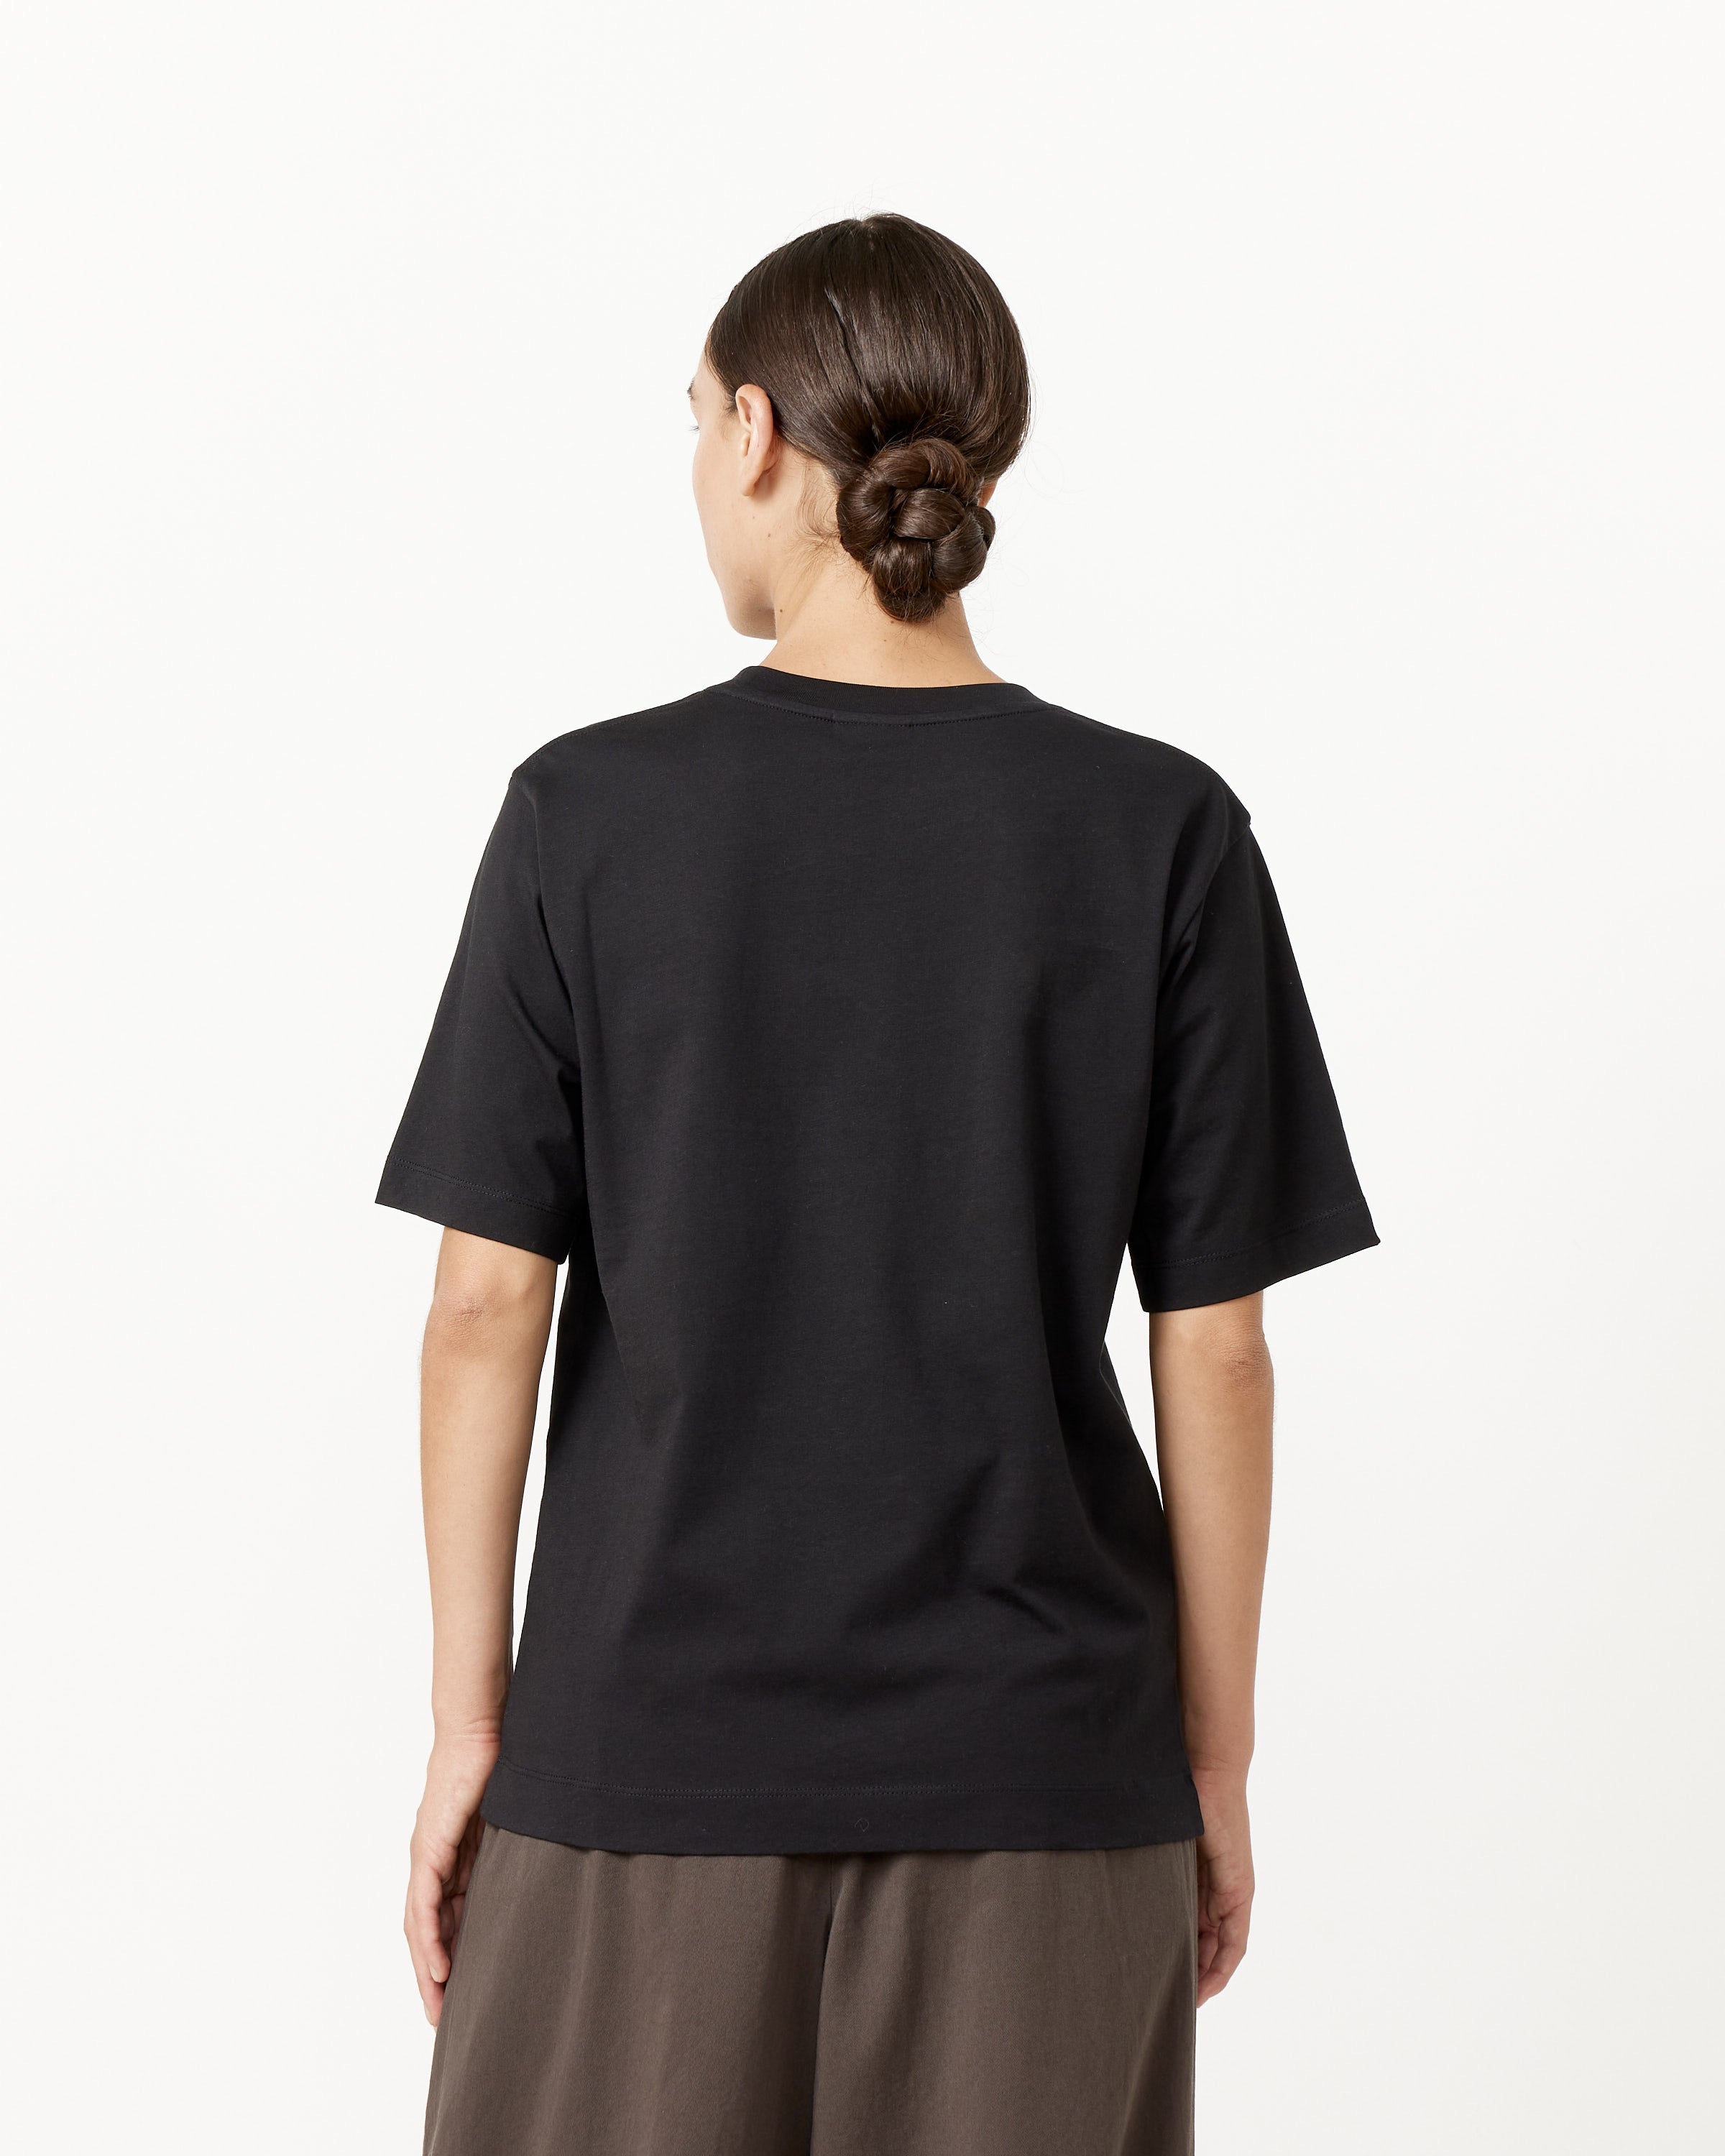 Relaxed T-Shirt in Black